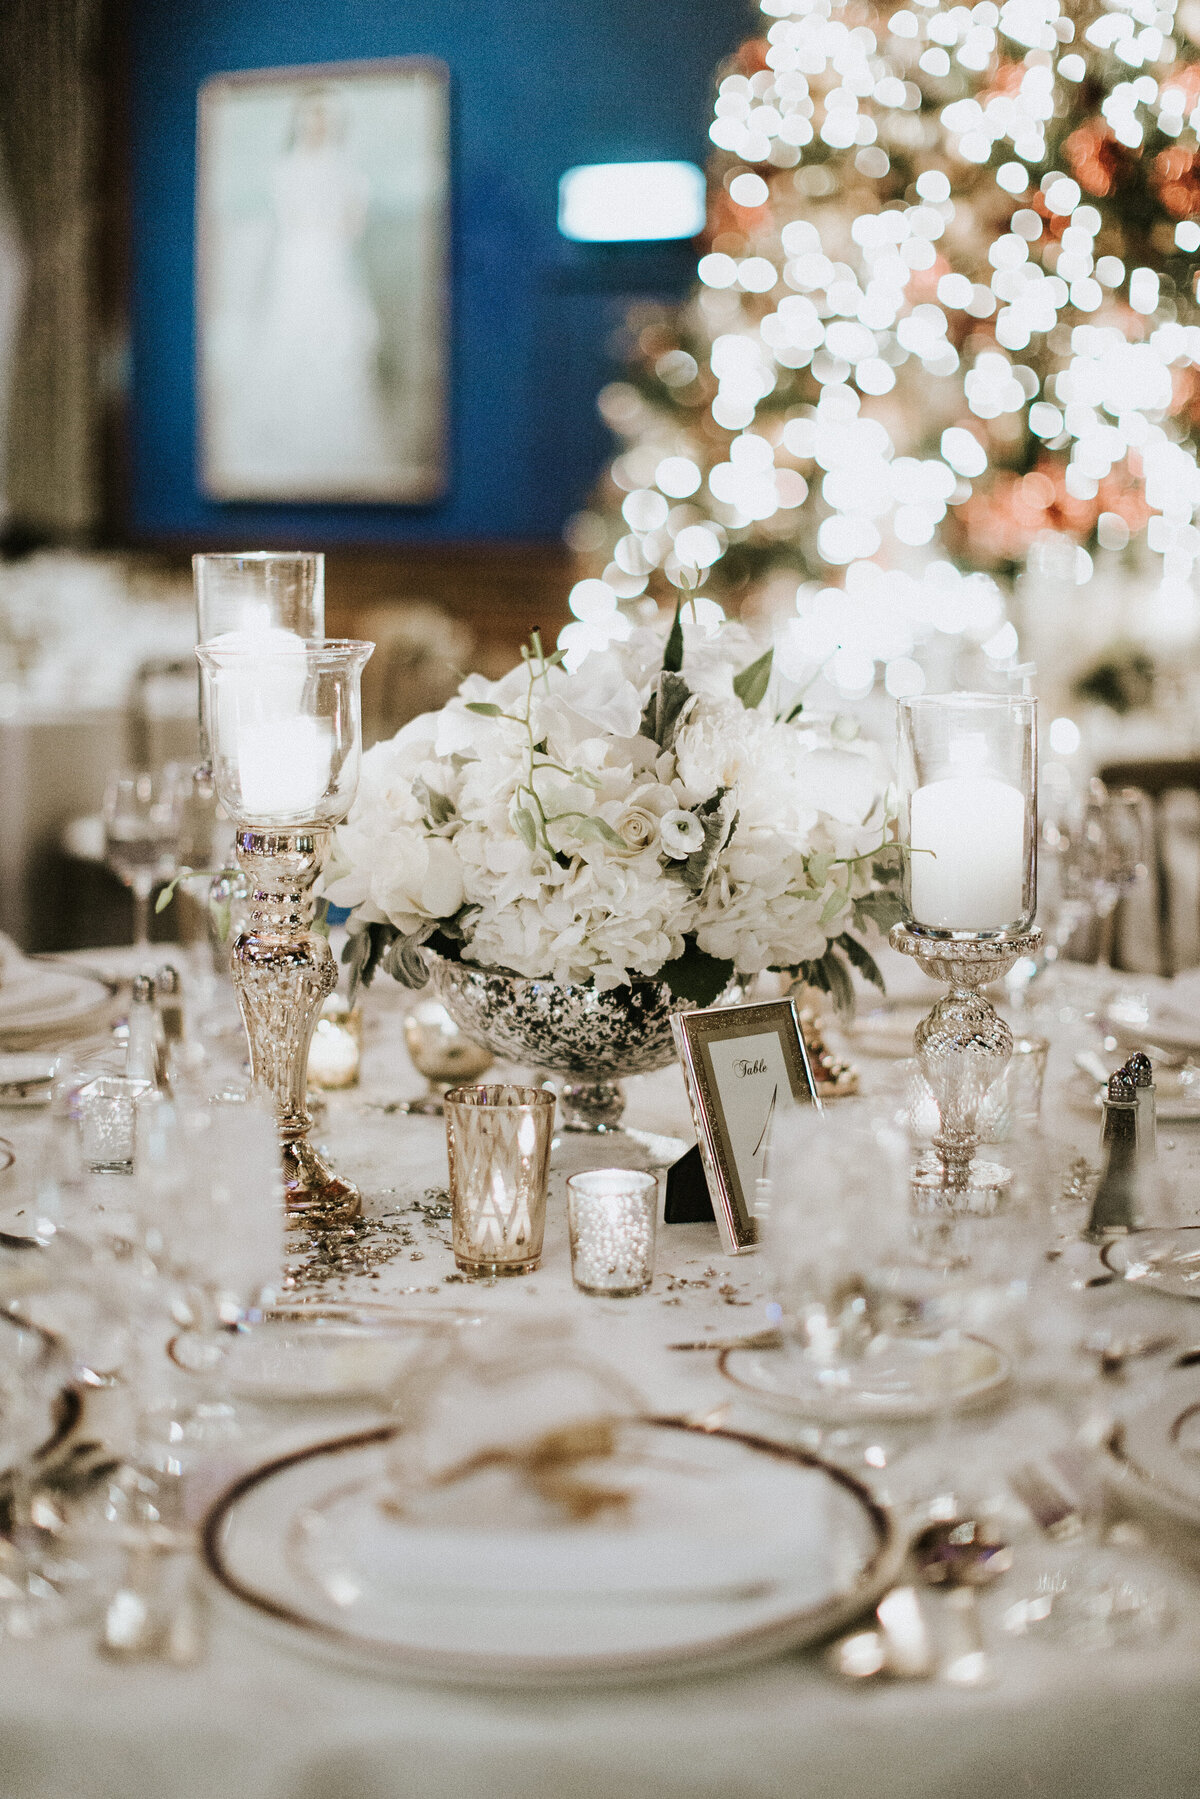 All white wedding centerpiece on tabletop